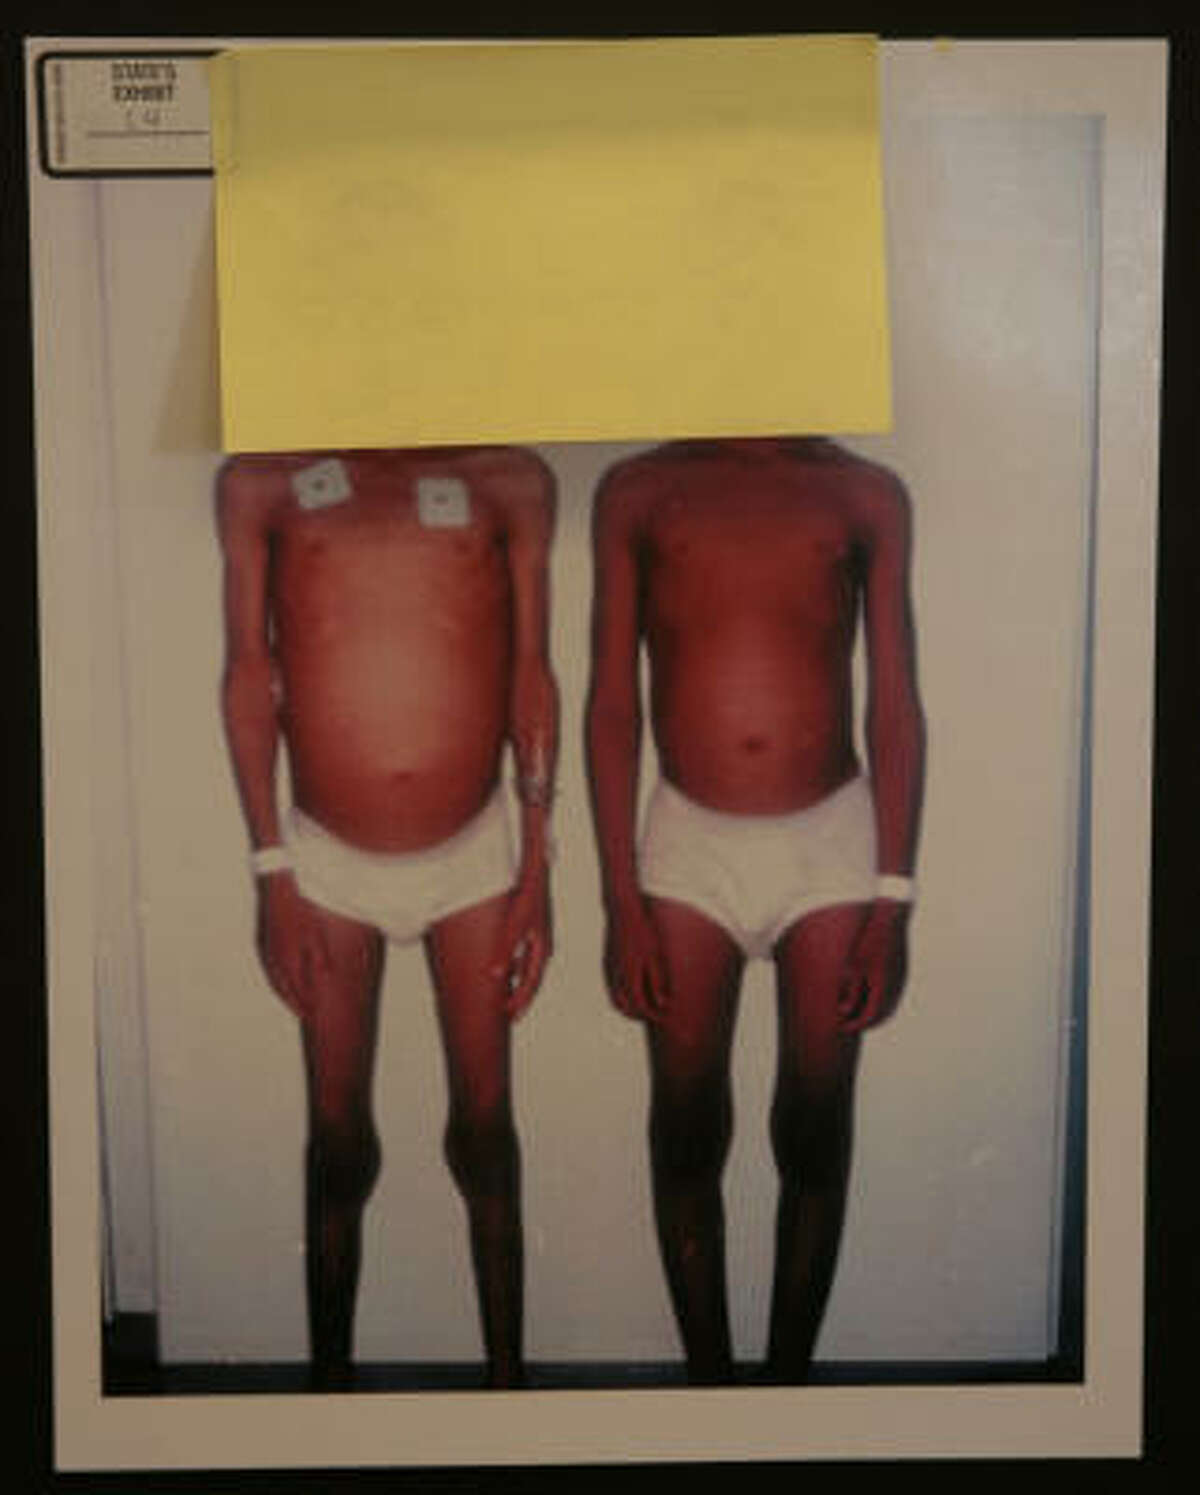 Evidence photos show the emaciated condition of the two brothers.